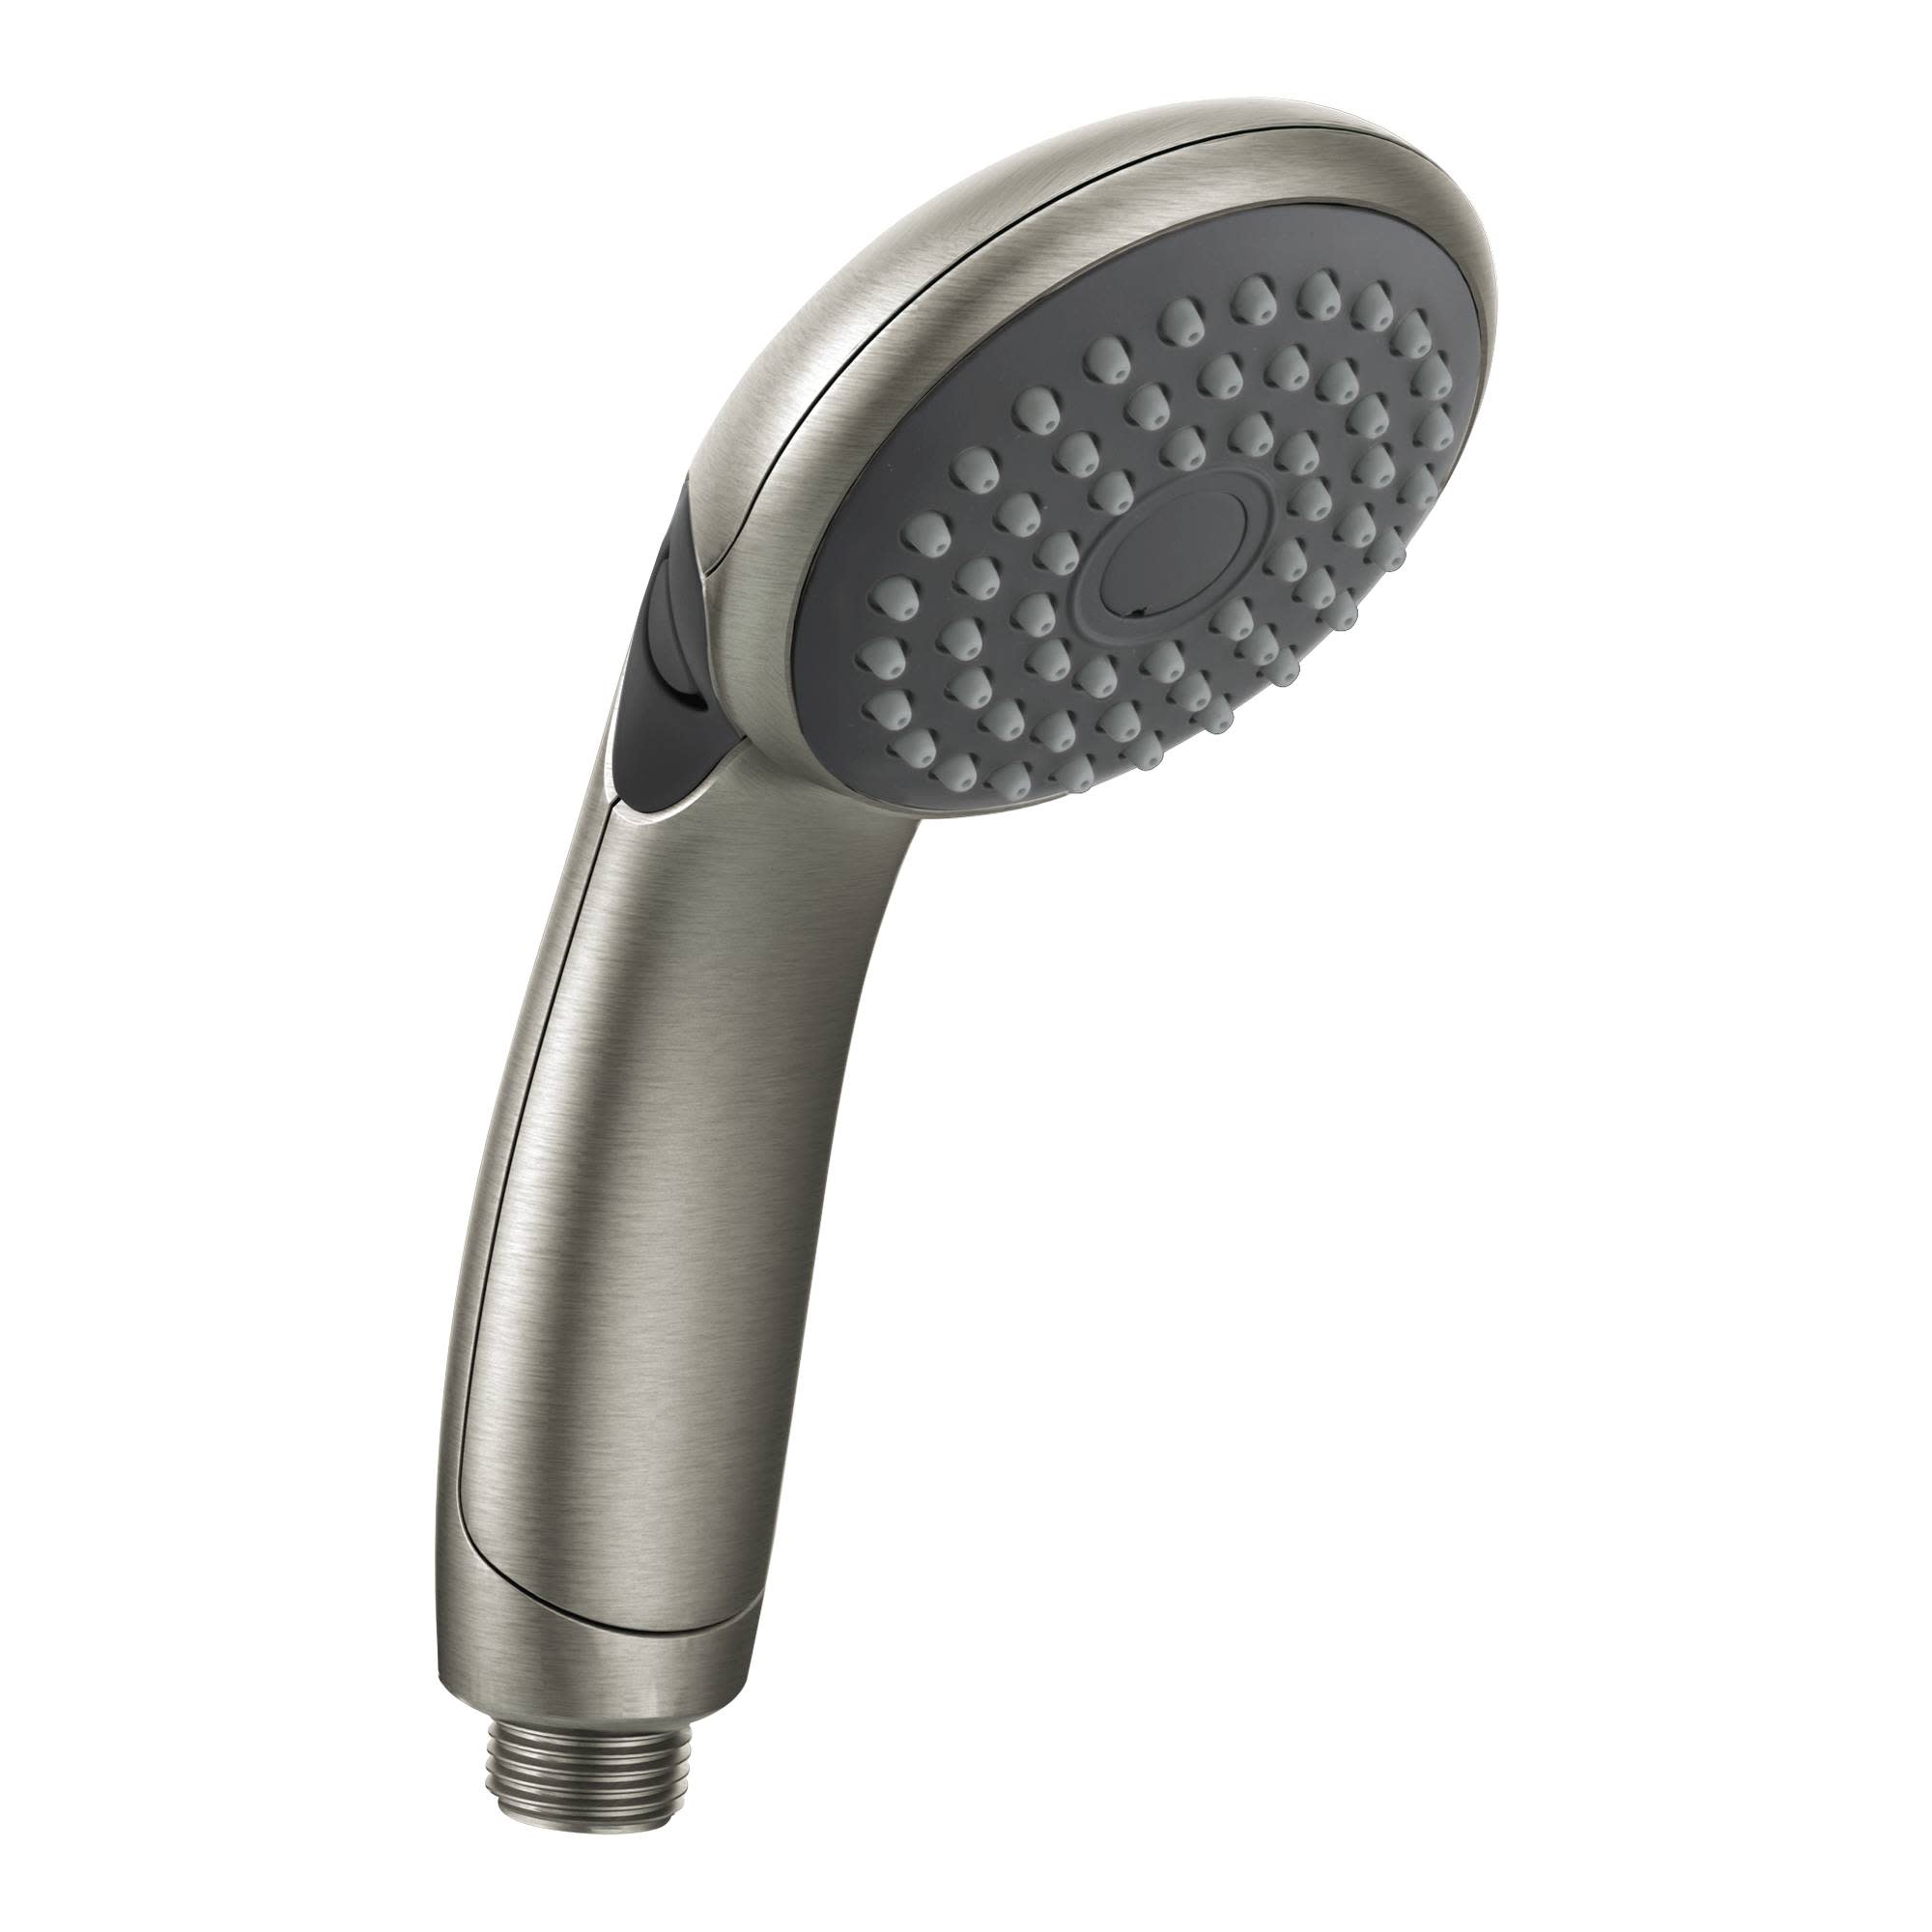 Moen 8349 Nickel Single Function Hand Shower From The M-Dura Collection ...